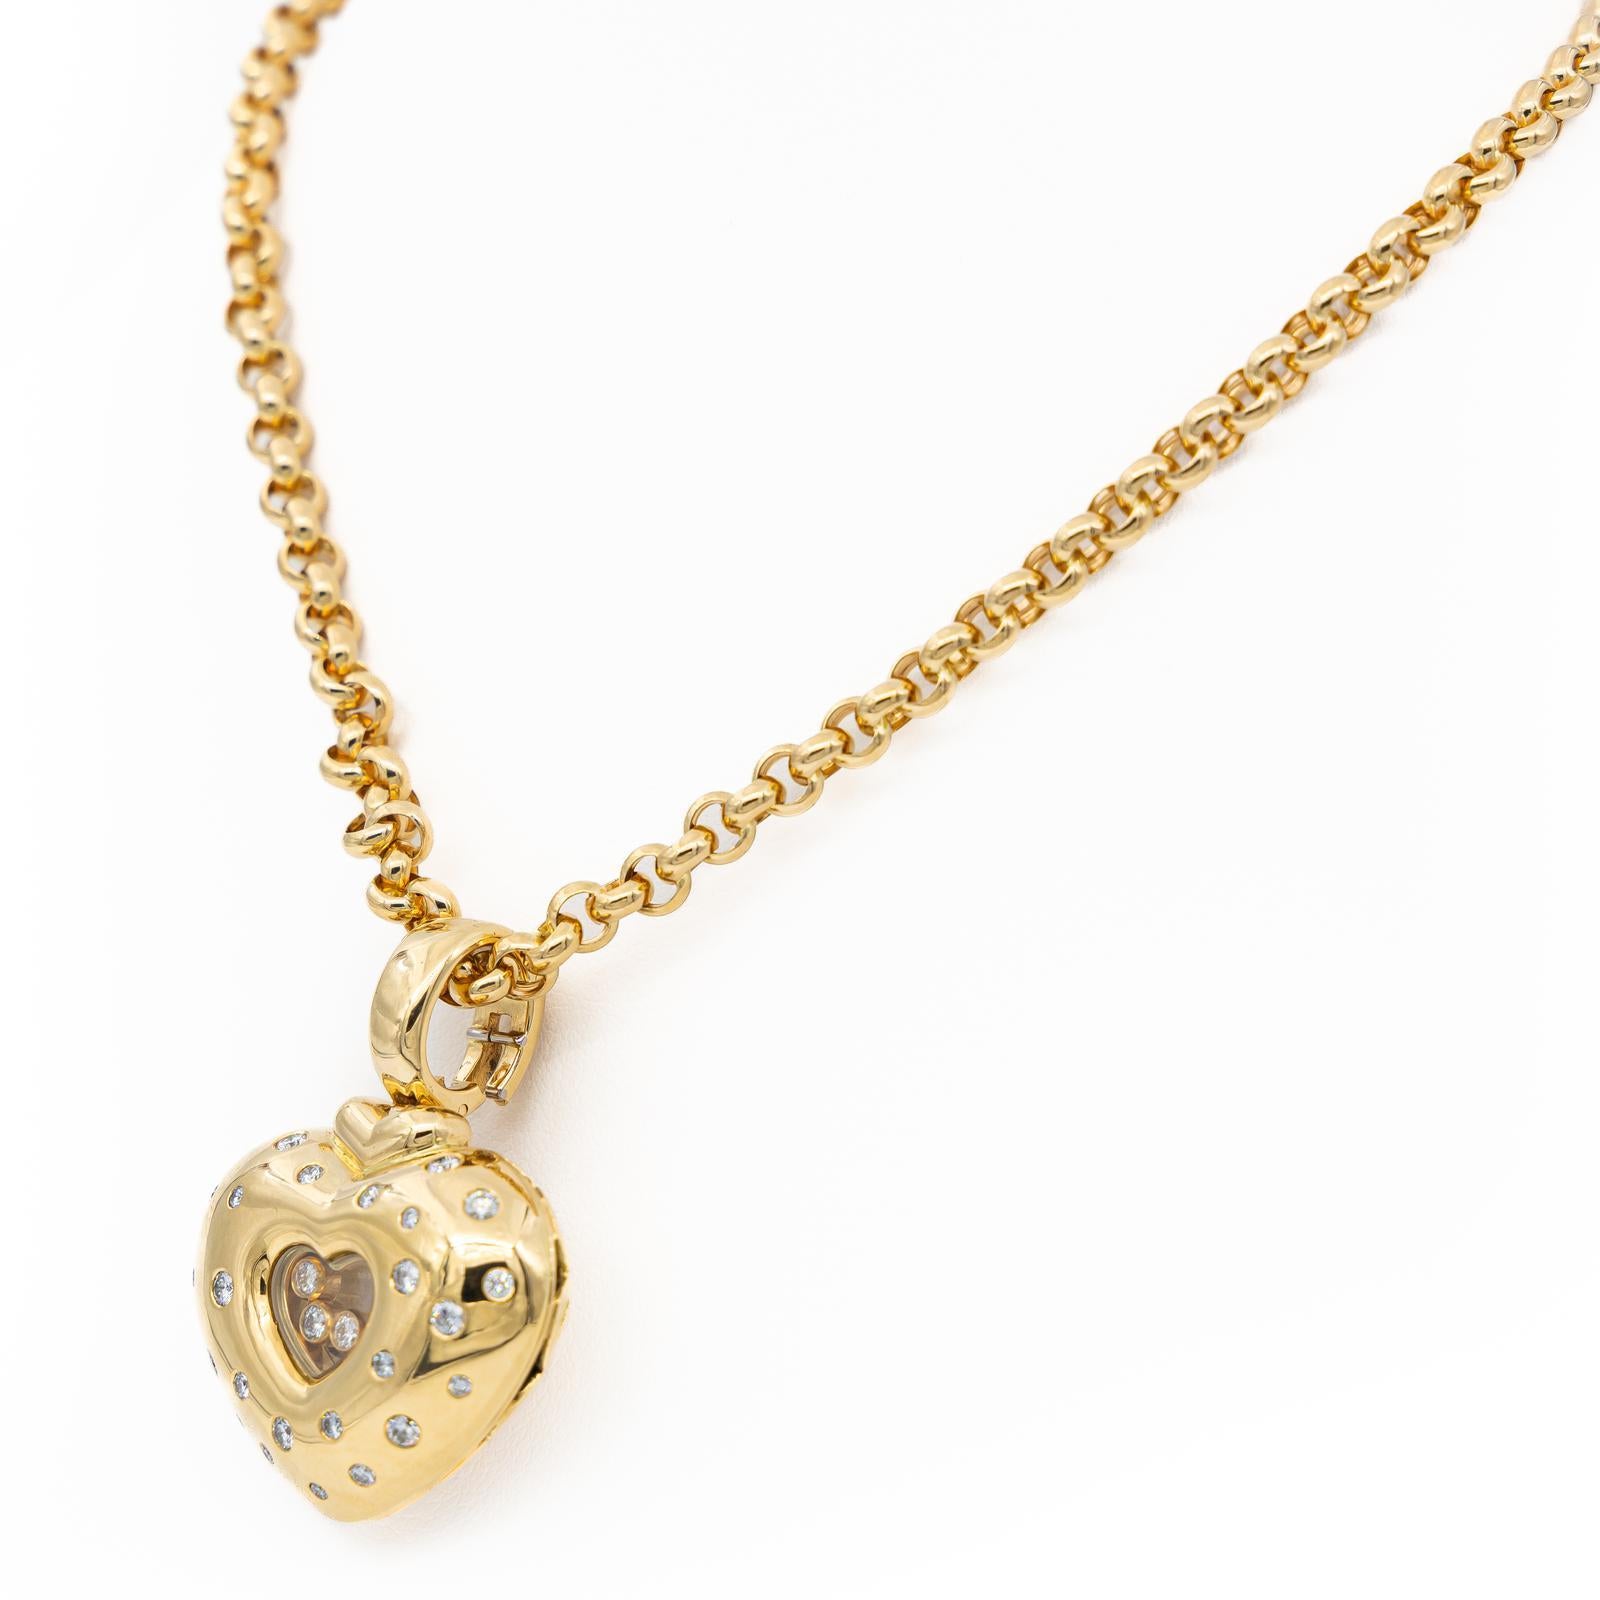 Brilliant Cut Chain and Pendant Signed by Chopard in Yellow Gold 750 Thousandths '18 Carats' For Sale